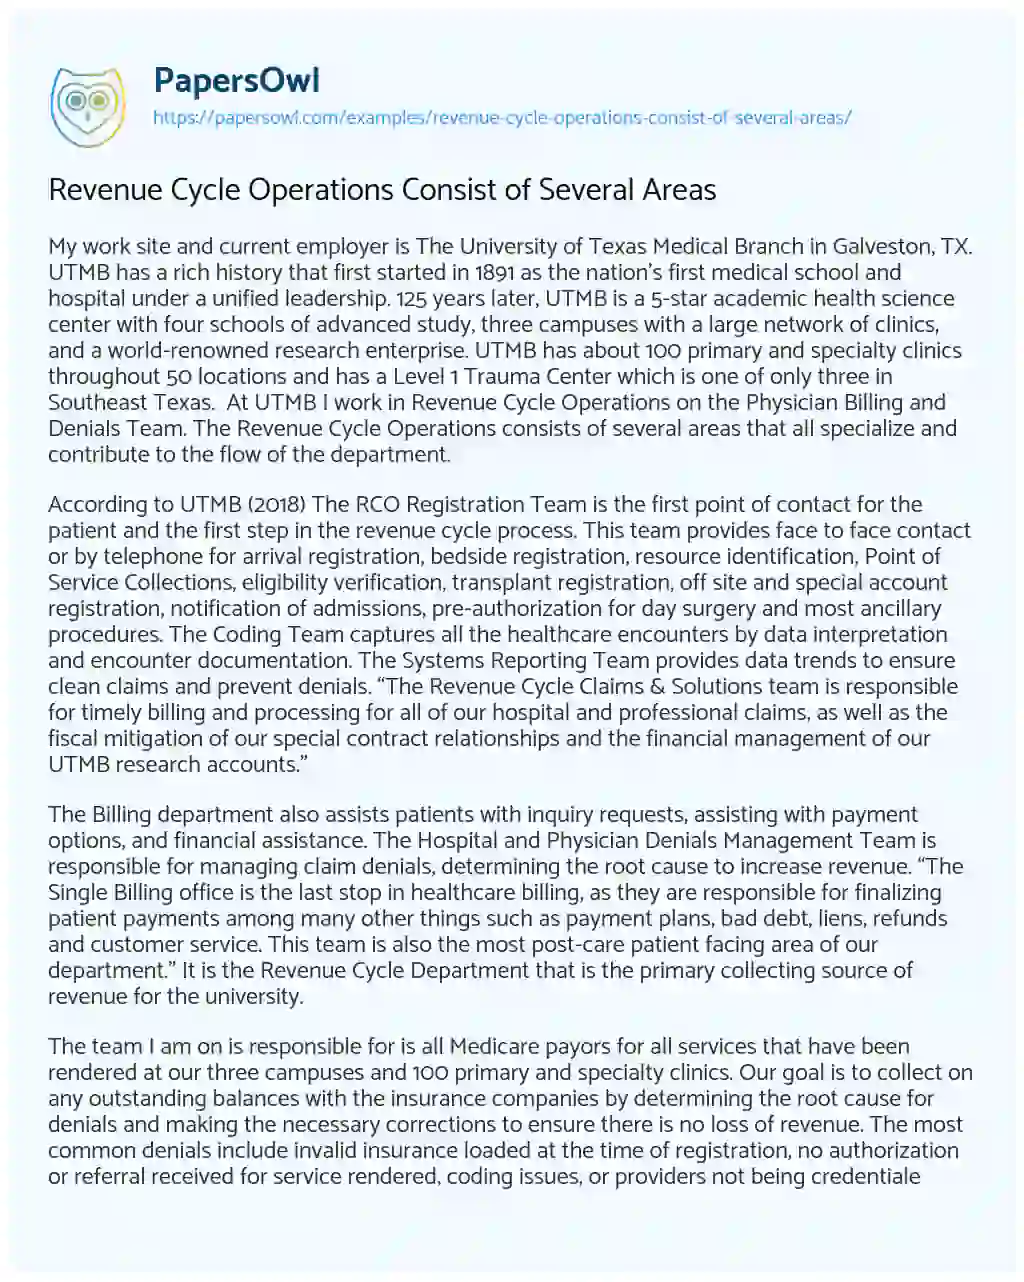 Essay on Revenue Cycle Operations Consist of Several Areas